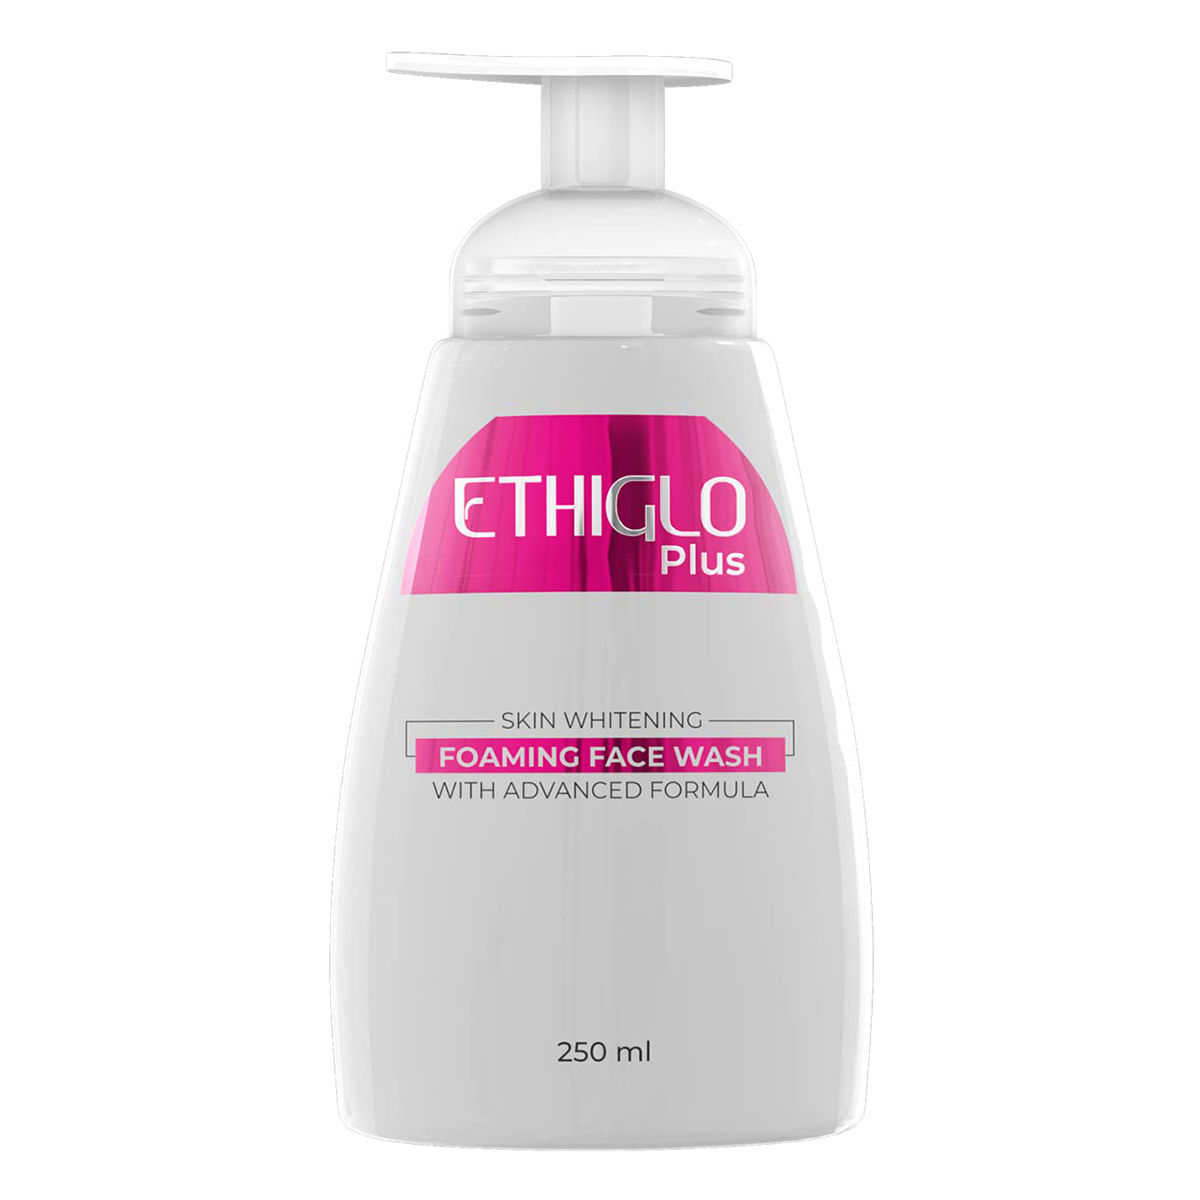 Ethiglo Plus Foaming Face Wash 250ml, Pack of 1 